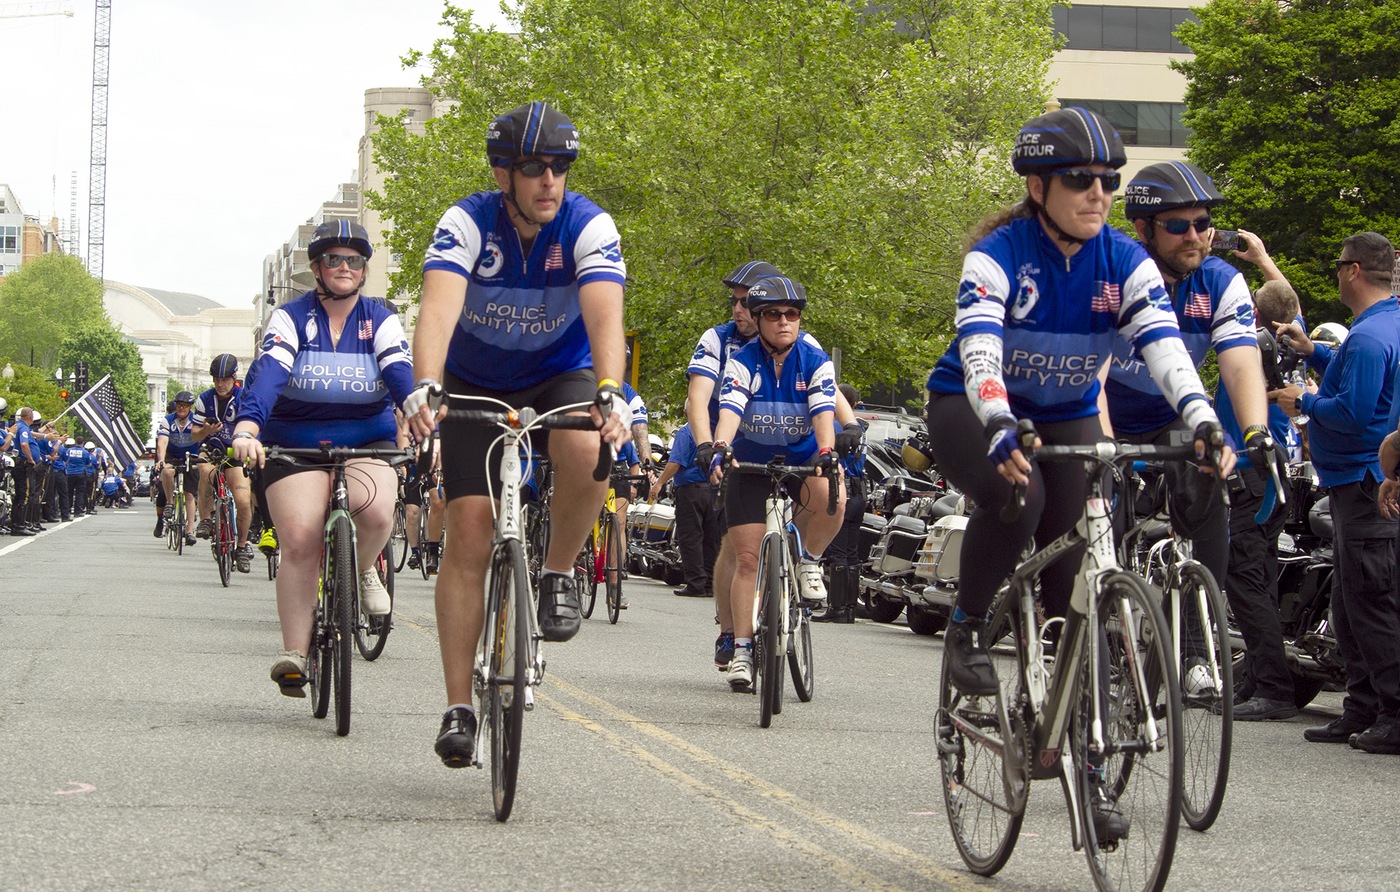 The Police Unity Tour is a four-day bicycle ride from New Jersey to Washington, D.C. that raises public awareness about law enforcement officers who have died in the line of duty.